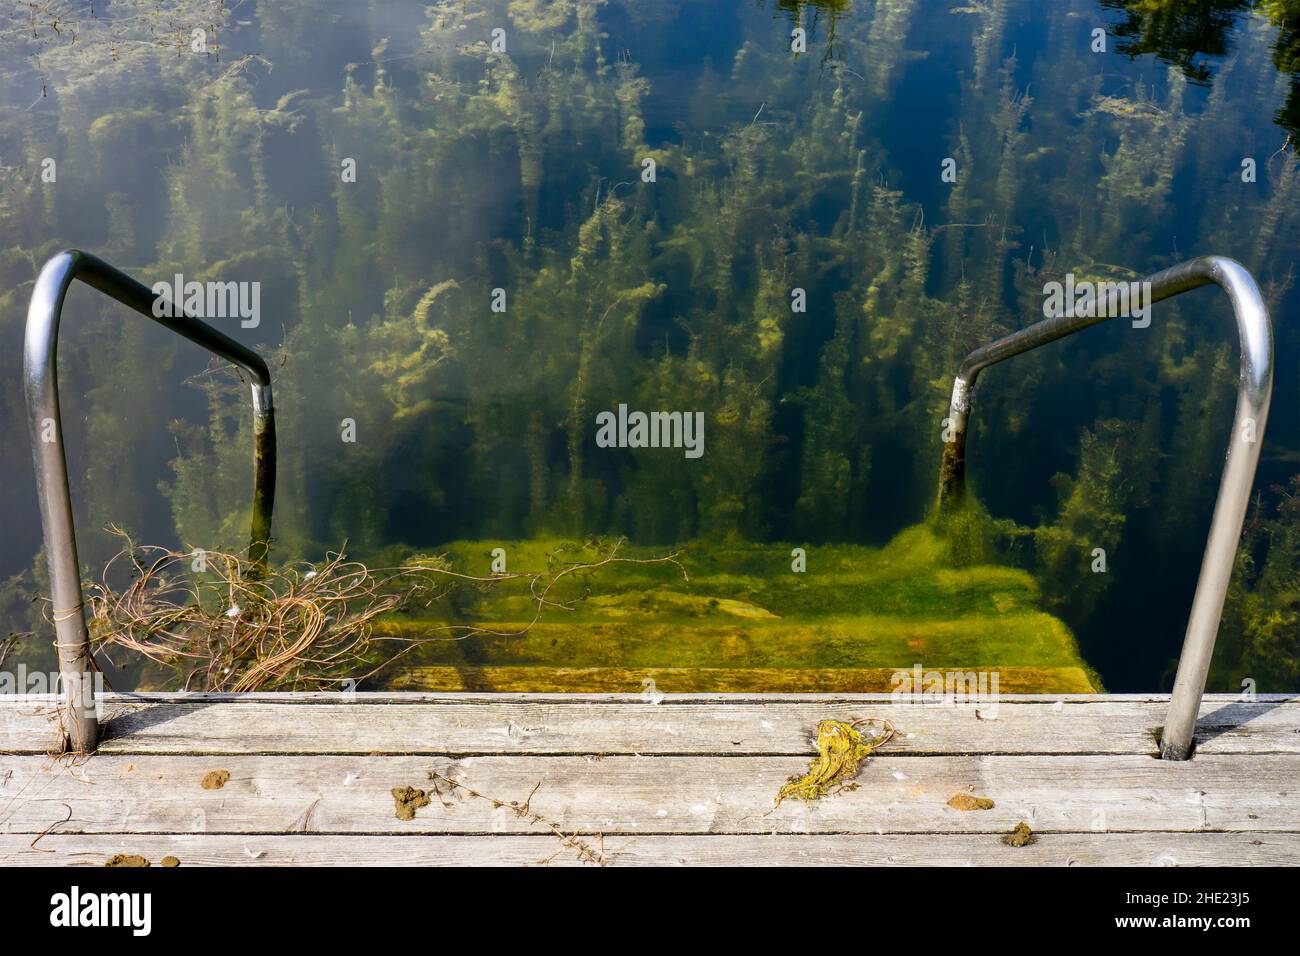 Abandoned dirty pool with algae and wood in it. Stock Photo